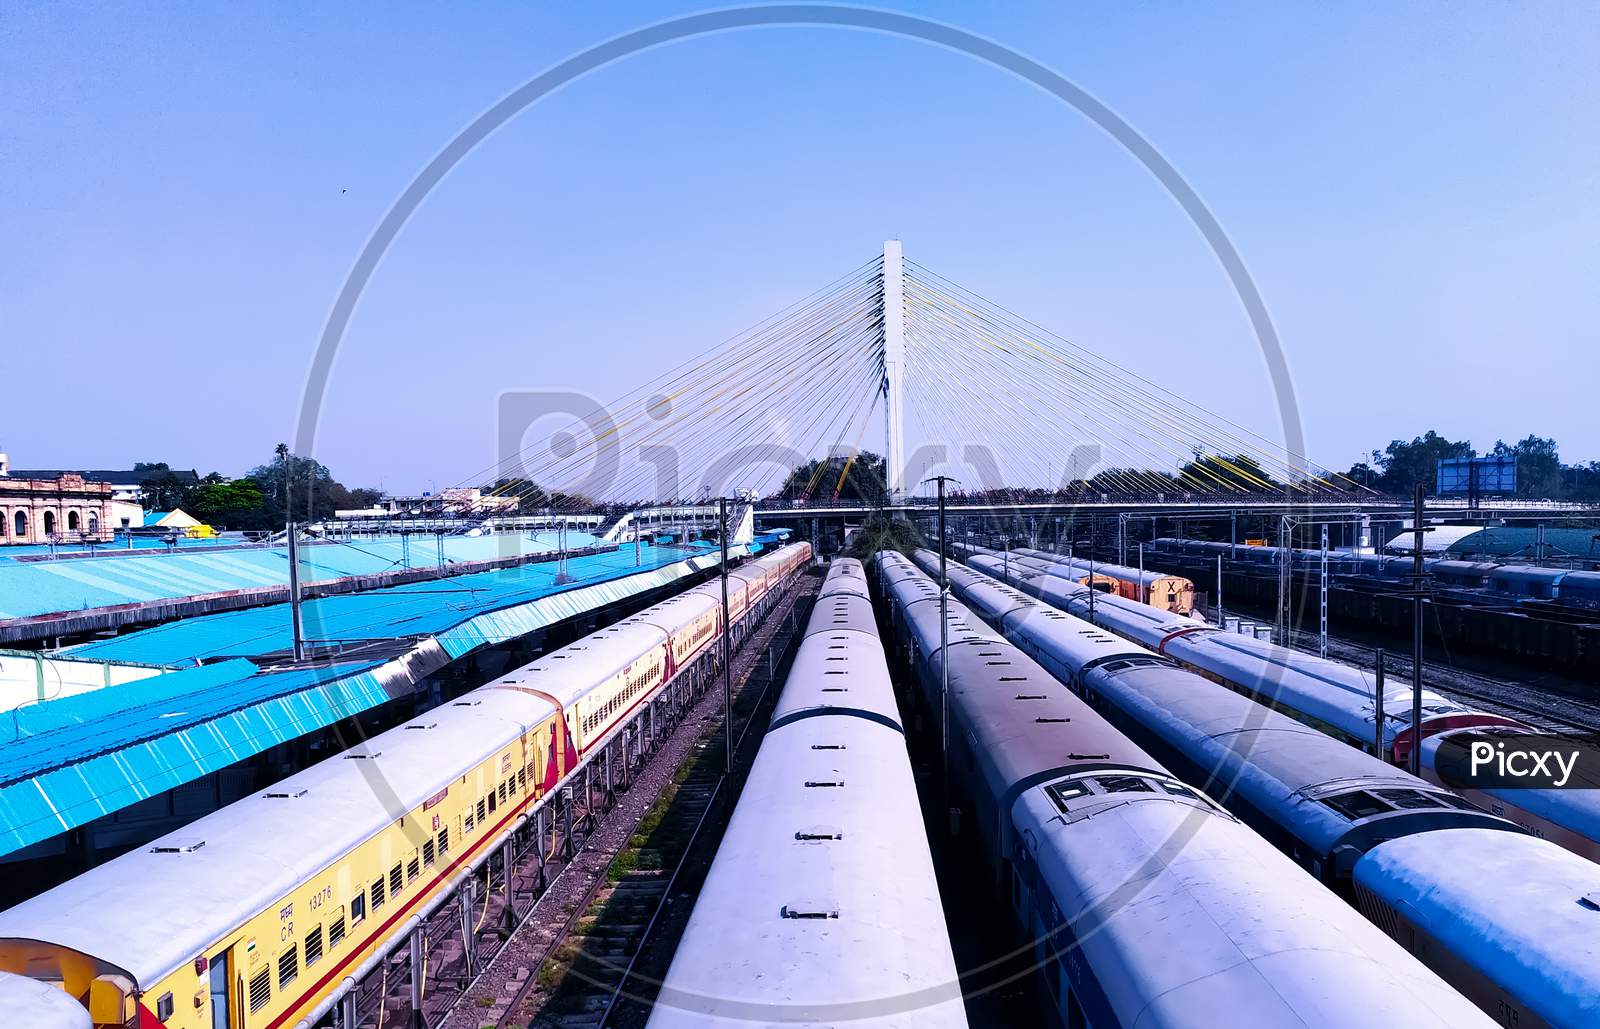 beautiful scenery of Indian trains parked at railway station due to corona virus effect on India, skyline view